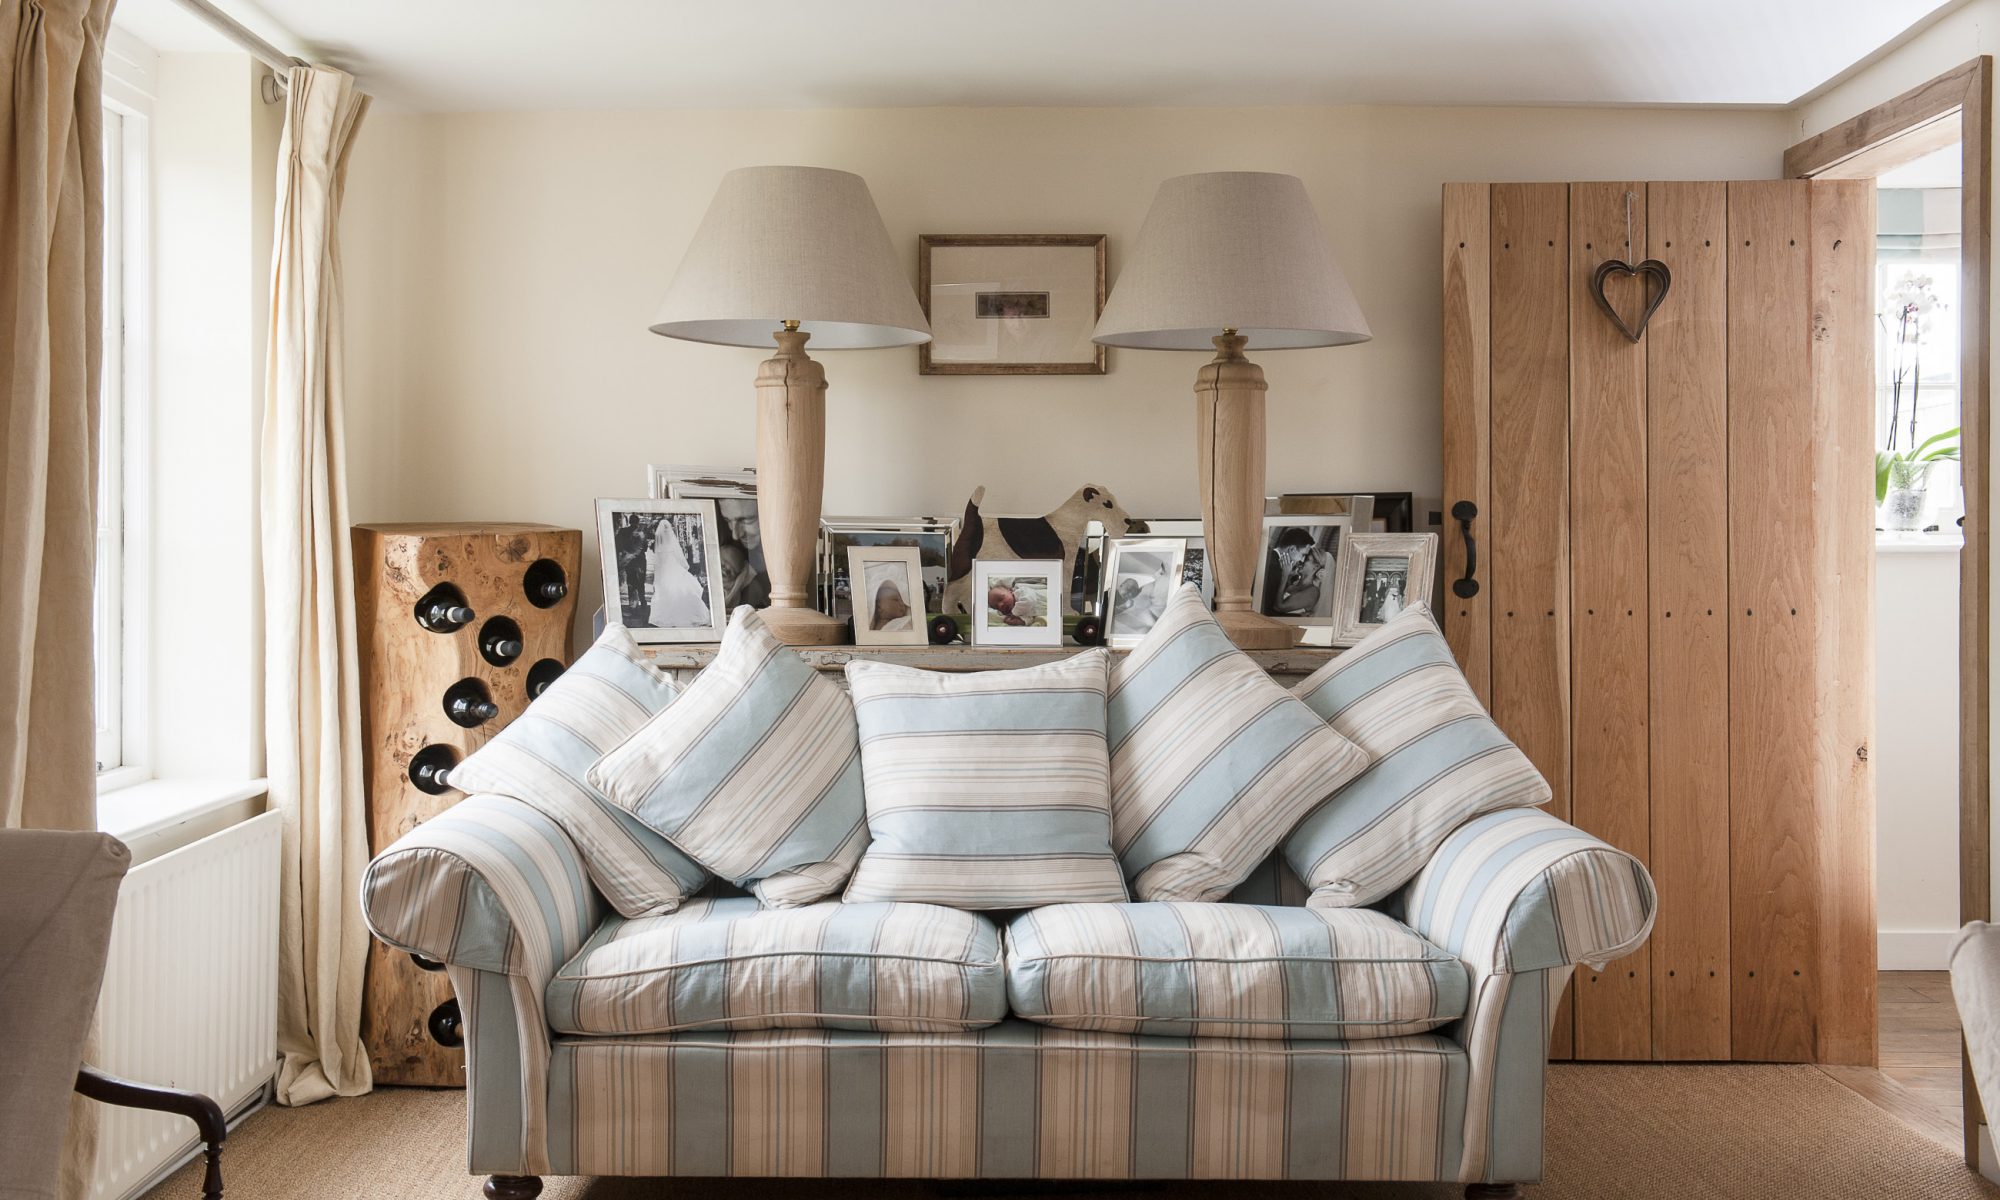 Holly found the elegant blue and white striped sofa at one end of the drawing room from Balmain & Balmain. The lamps and fox terrier toy, interspersed with groupings of family photographs, are from Holly’s company Duck & Dog